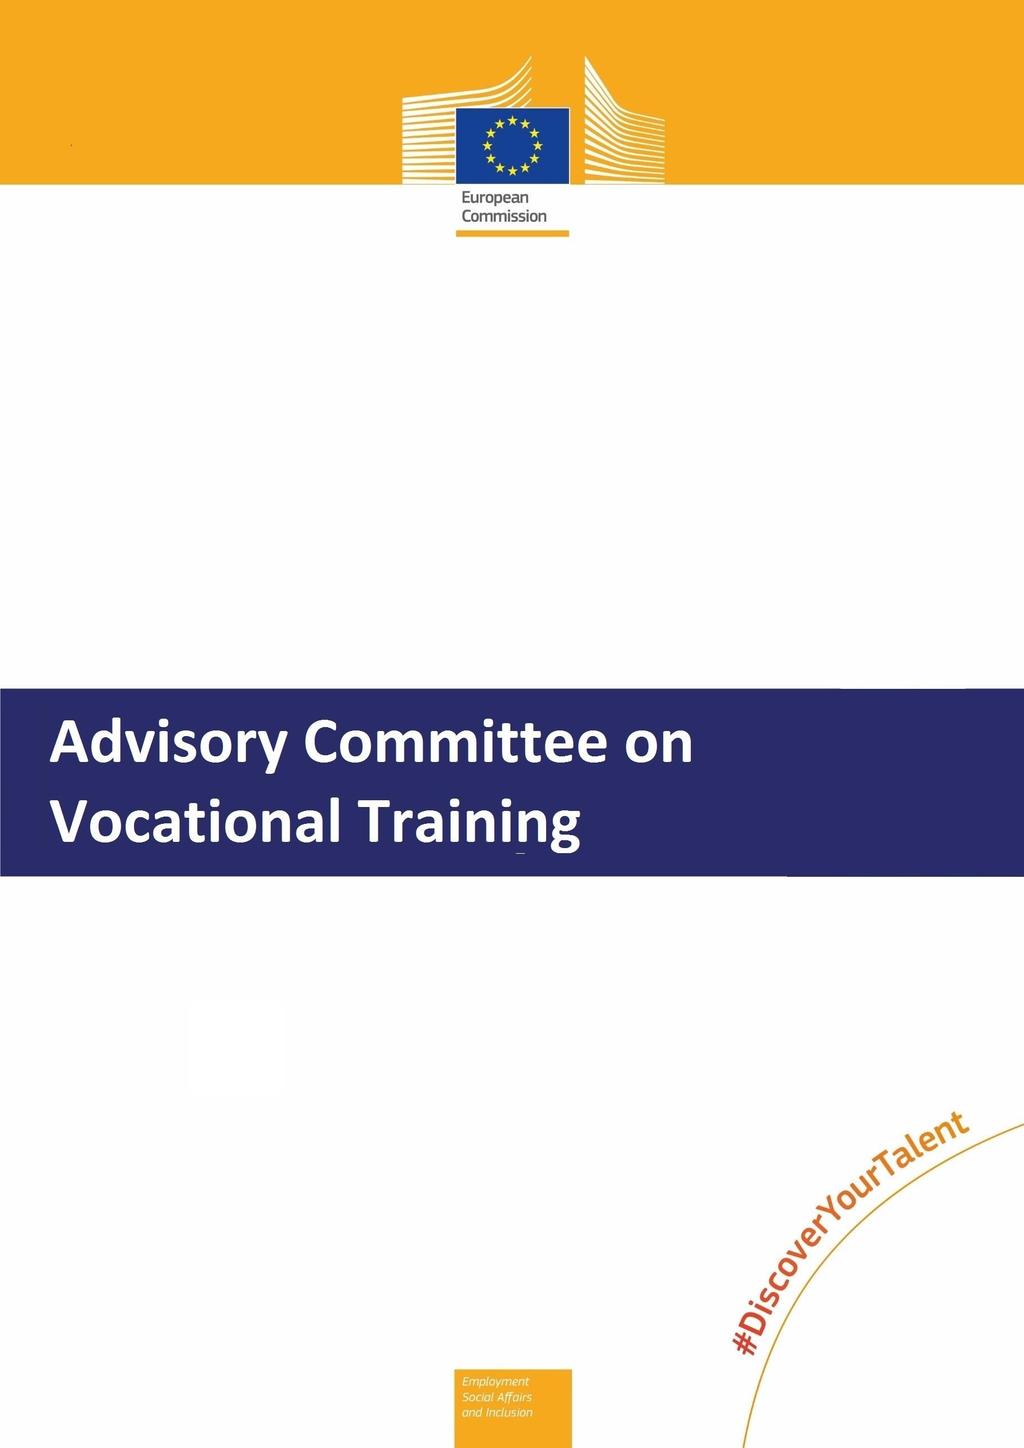 Opinion on THE FUTURE OF VOCATIONAL EDUCATION